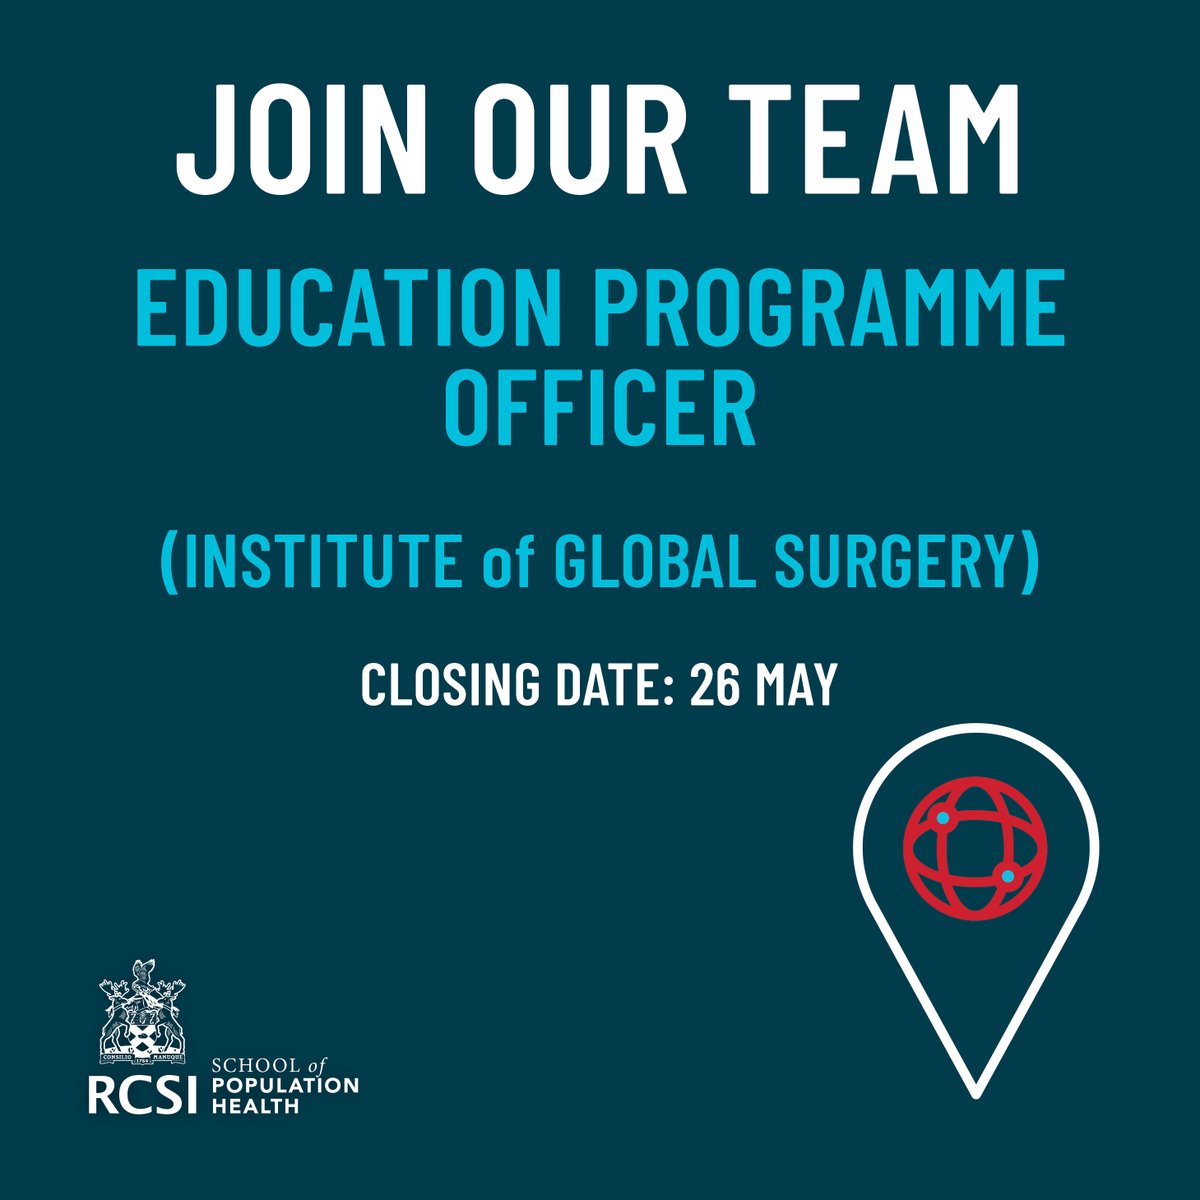 The Institute of Global Surgery @RCSI_GlobalSurg is recruiting for an Education Programme Officer. This is an exciting opportunity to work on ed & training projects, inc supporting surgical training institutions in LMICs; global medical ed, etc.

For more:
my.corehr.com/pls/coreportal…